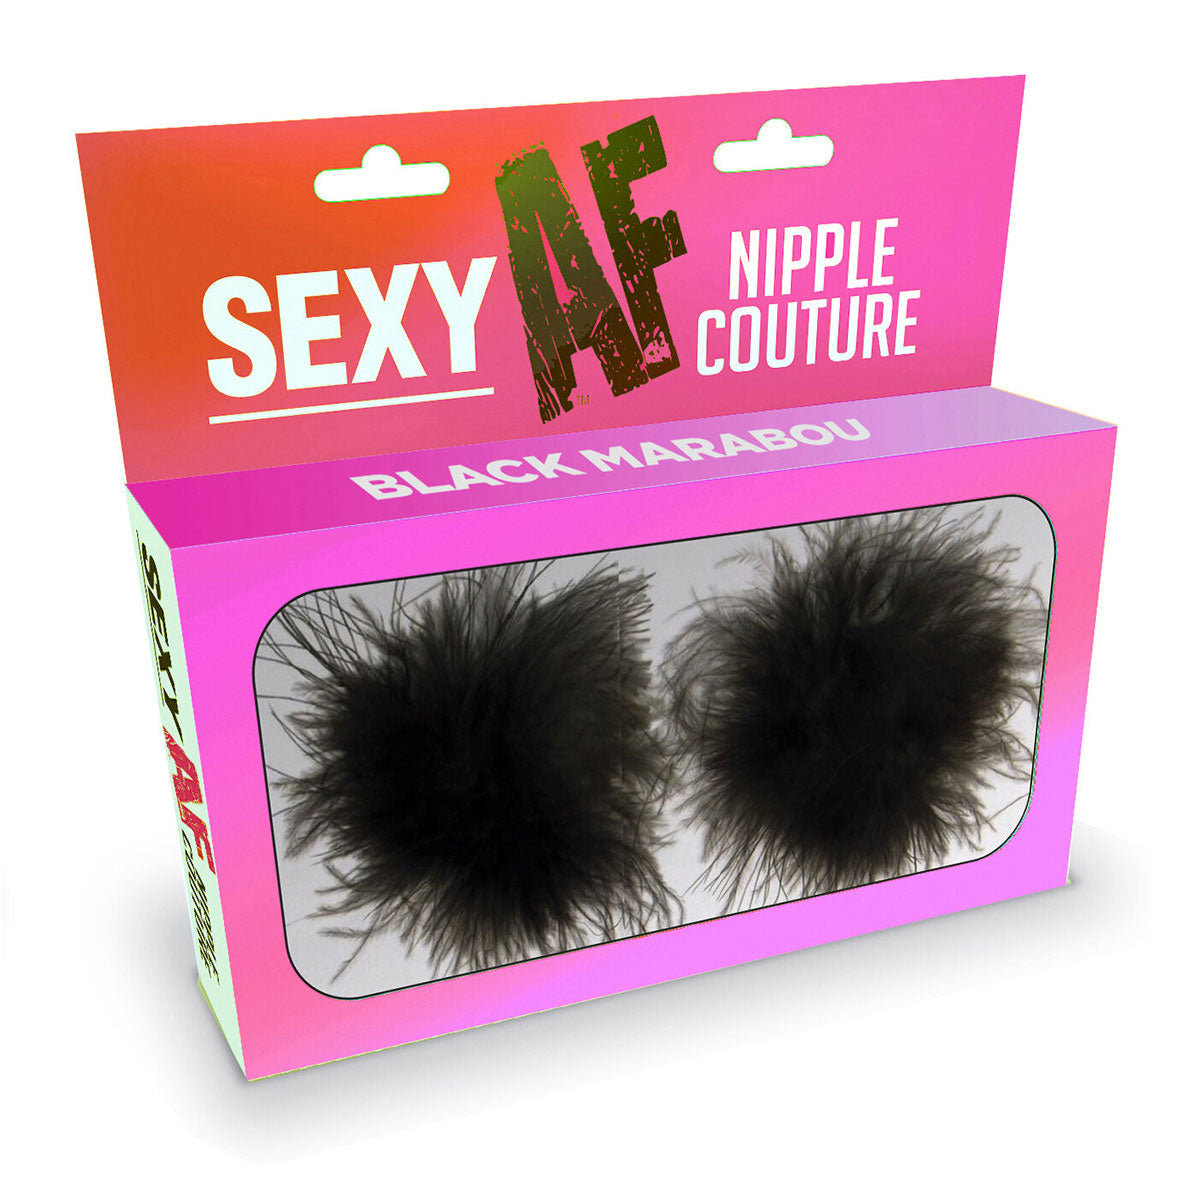 Sexy AF Nipple Couture - Black Marabou